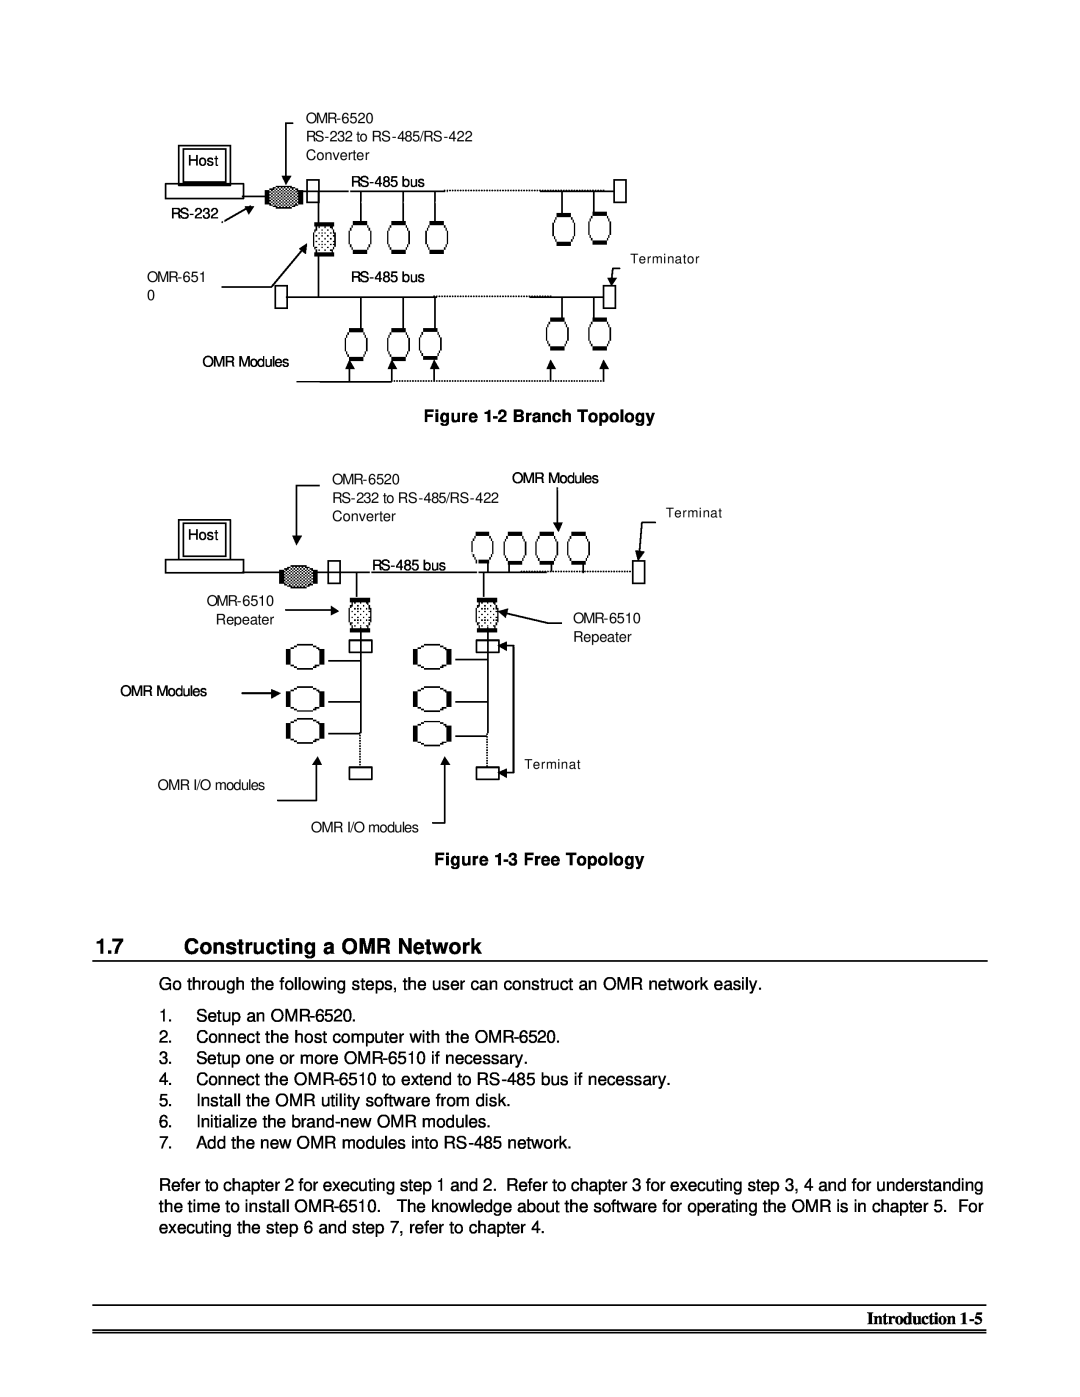 Omega Engineering OMR-6520, OMR-6510 manual Constructing a OMR Network, 2 Branch Topology, 3 Free Topology 